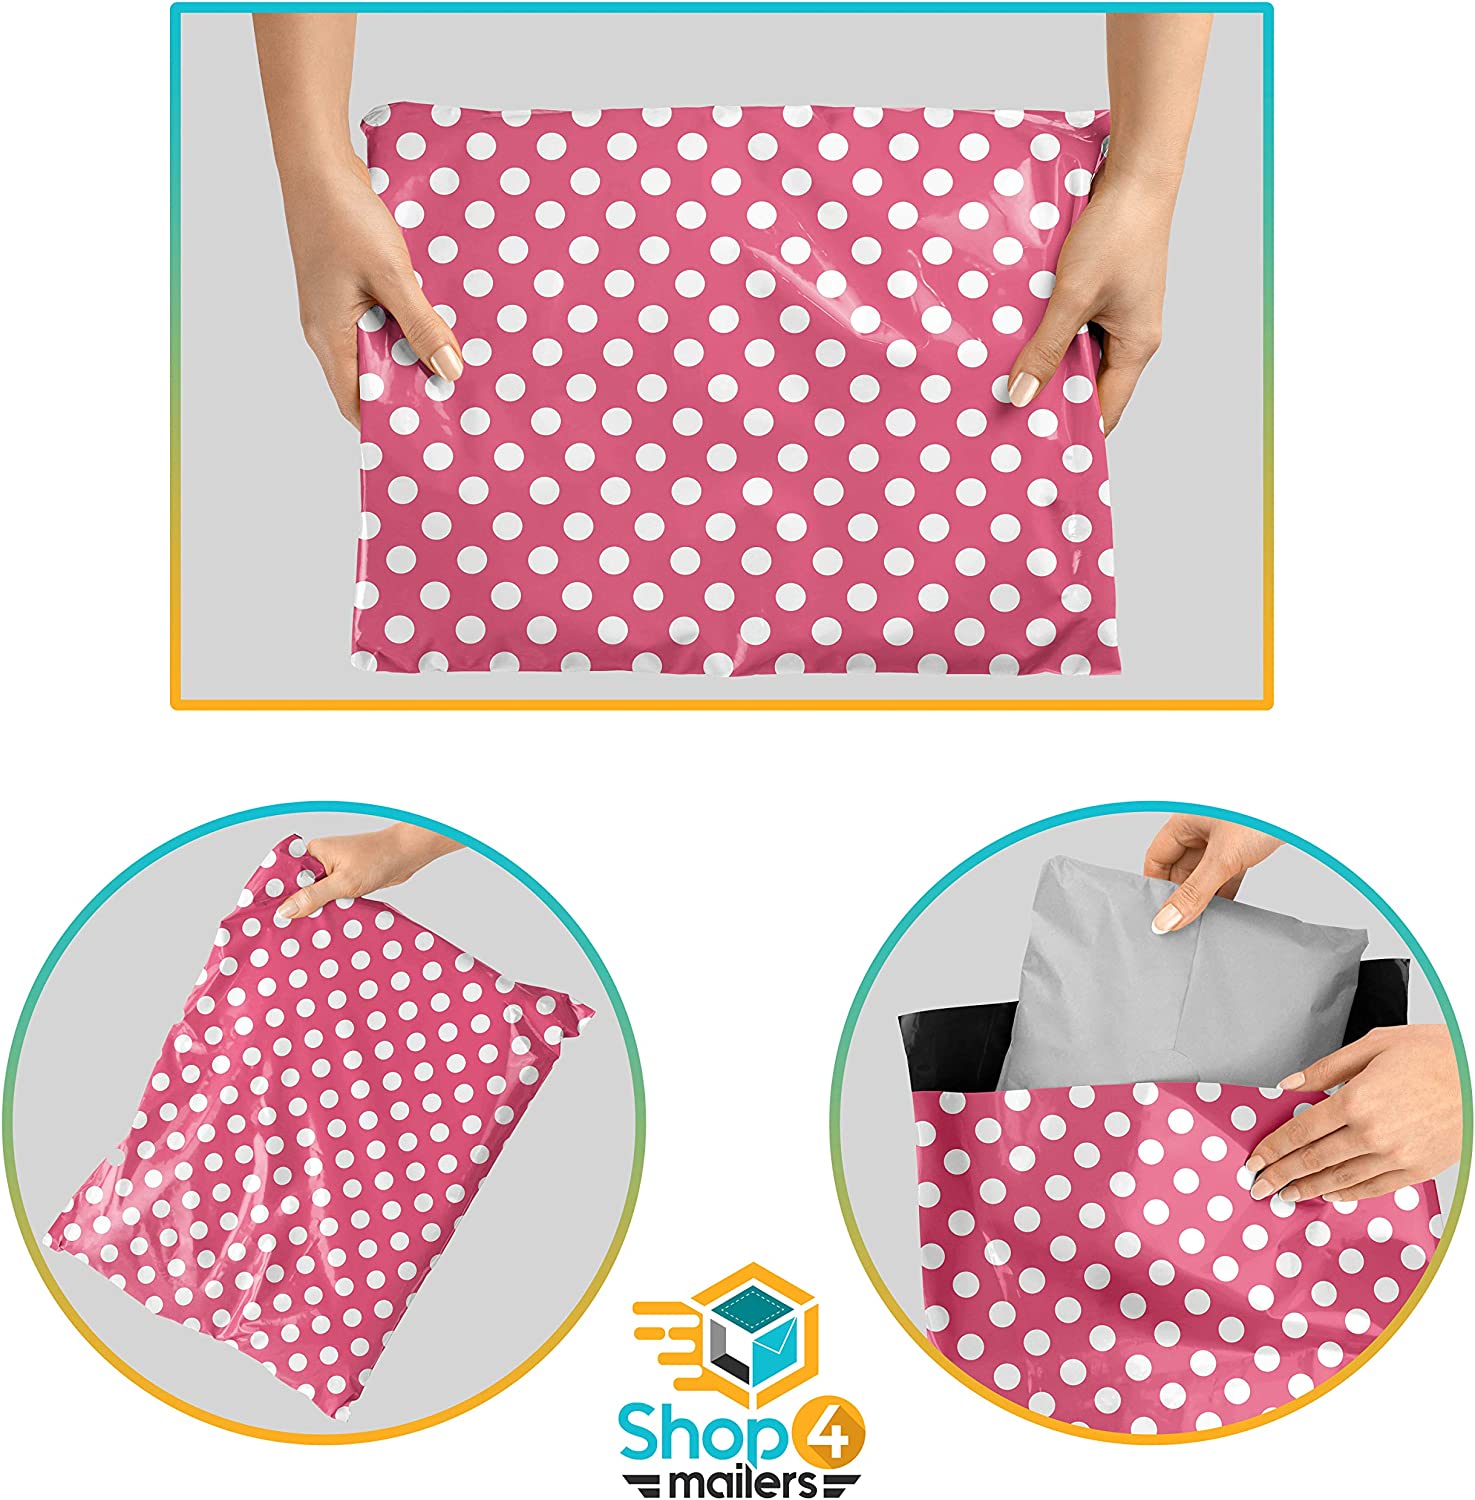 Mini Flat Paper Bags in Dark Pink or Blue Polka Dots, Made by